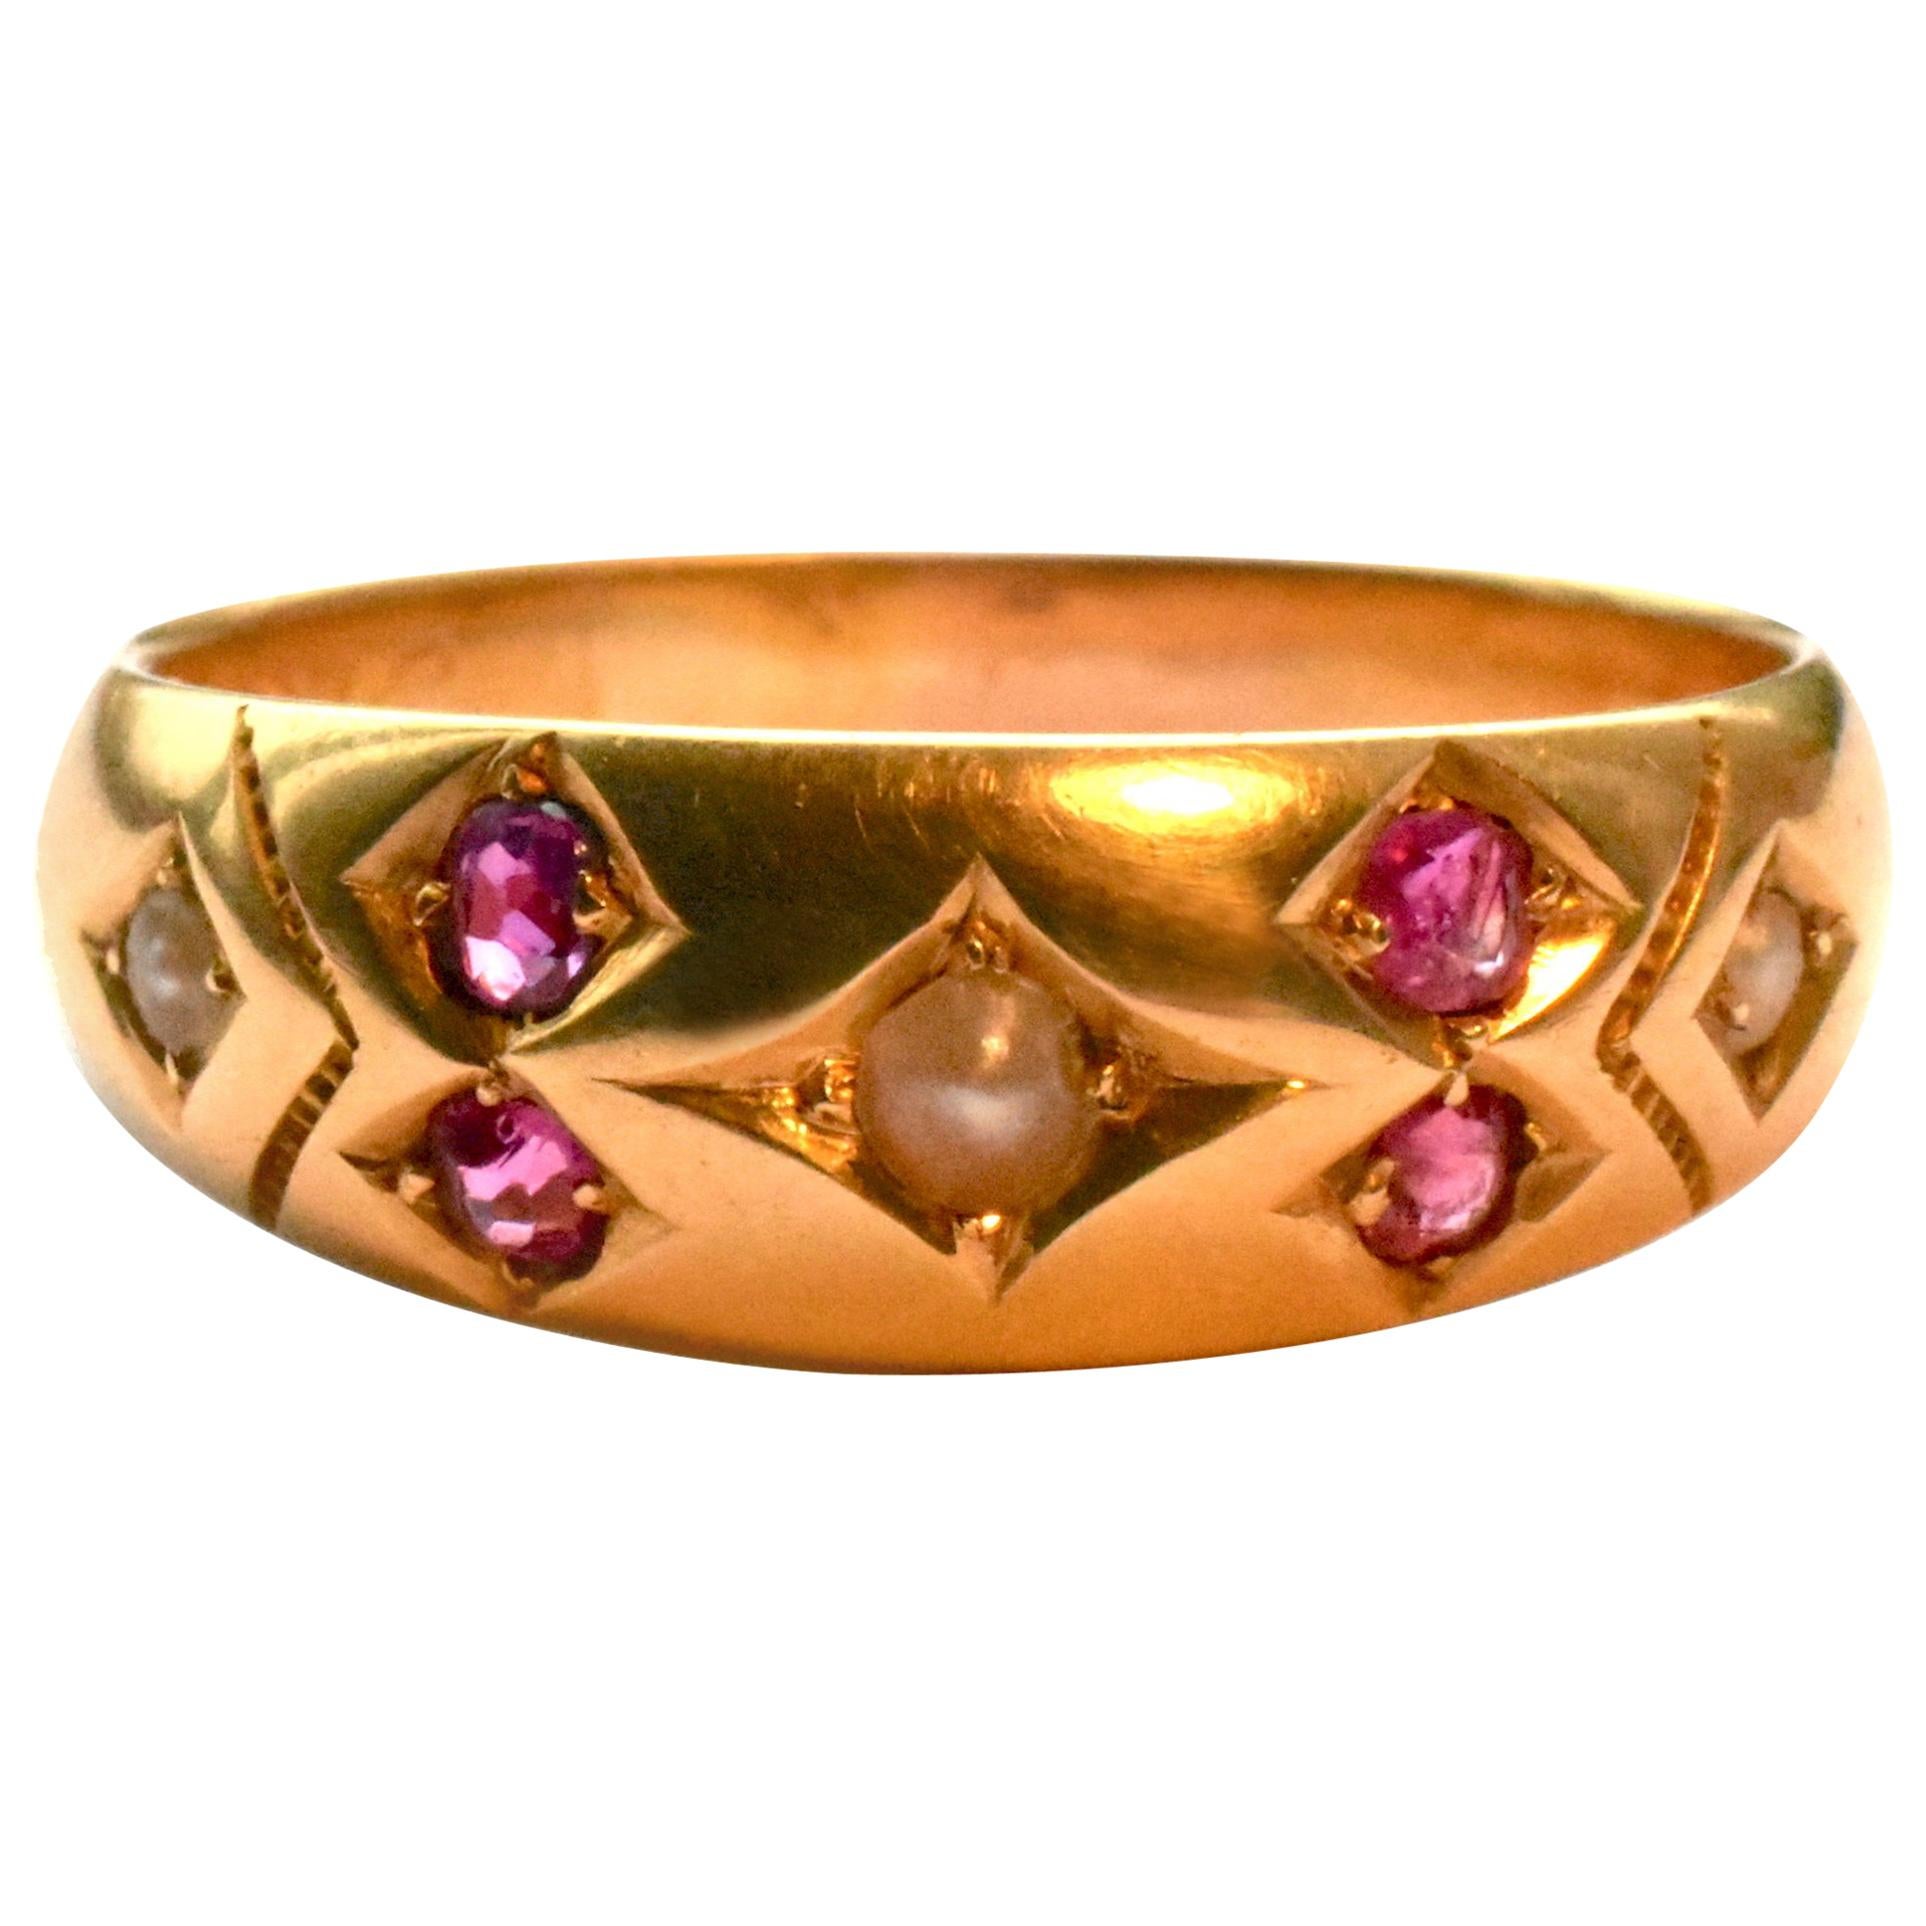 Antique Gold Gypsy Ring with Rubies and Pearls